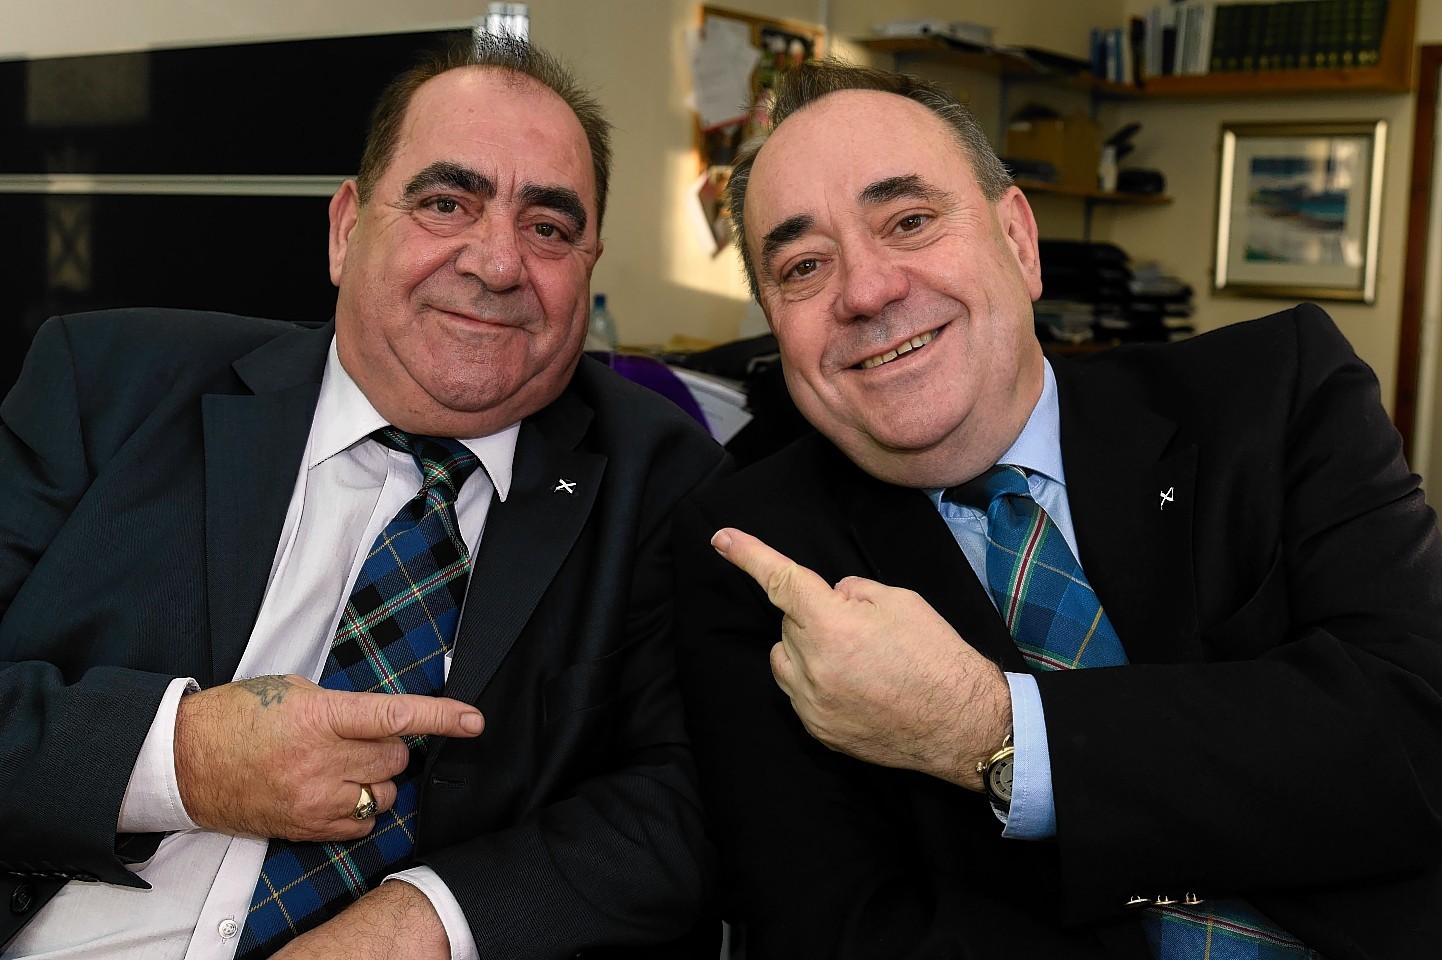 Who do you think will win a seat at Westminster? They are both backing each other.